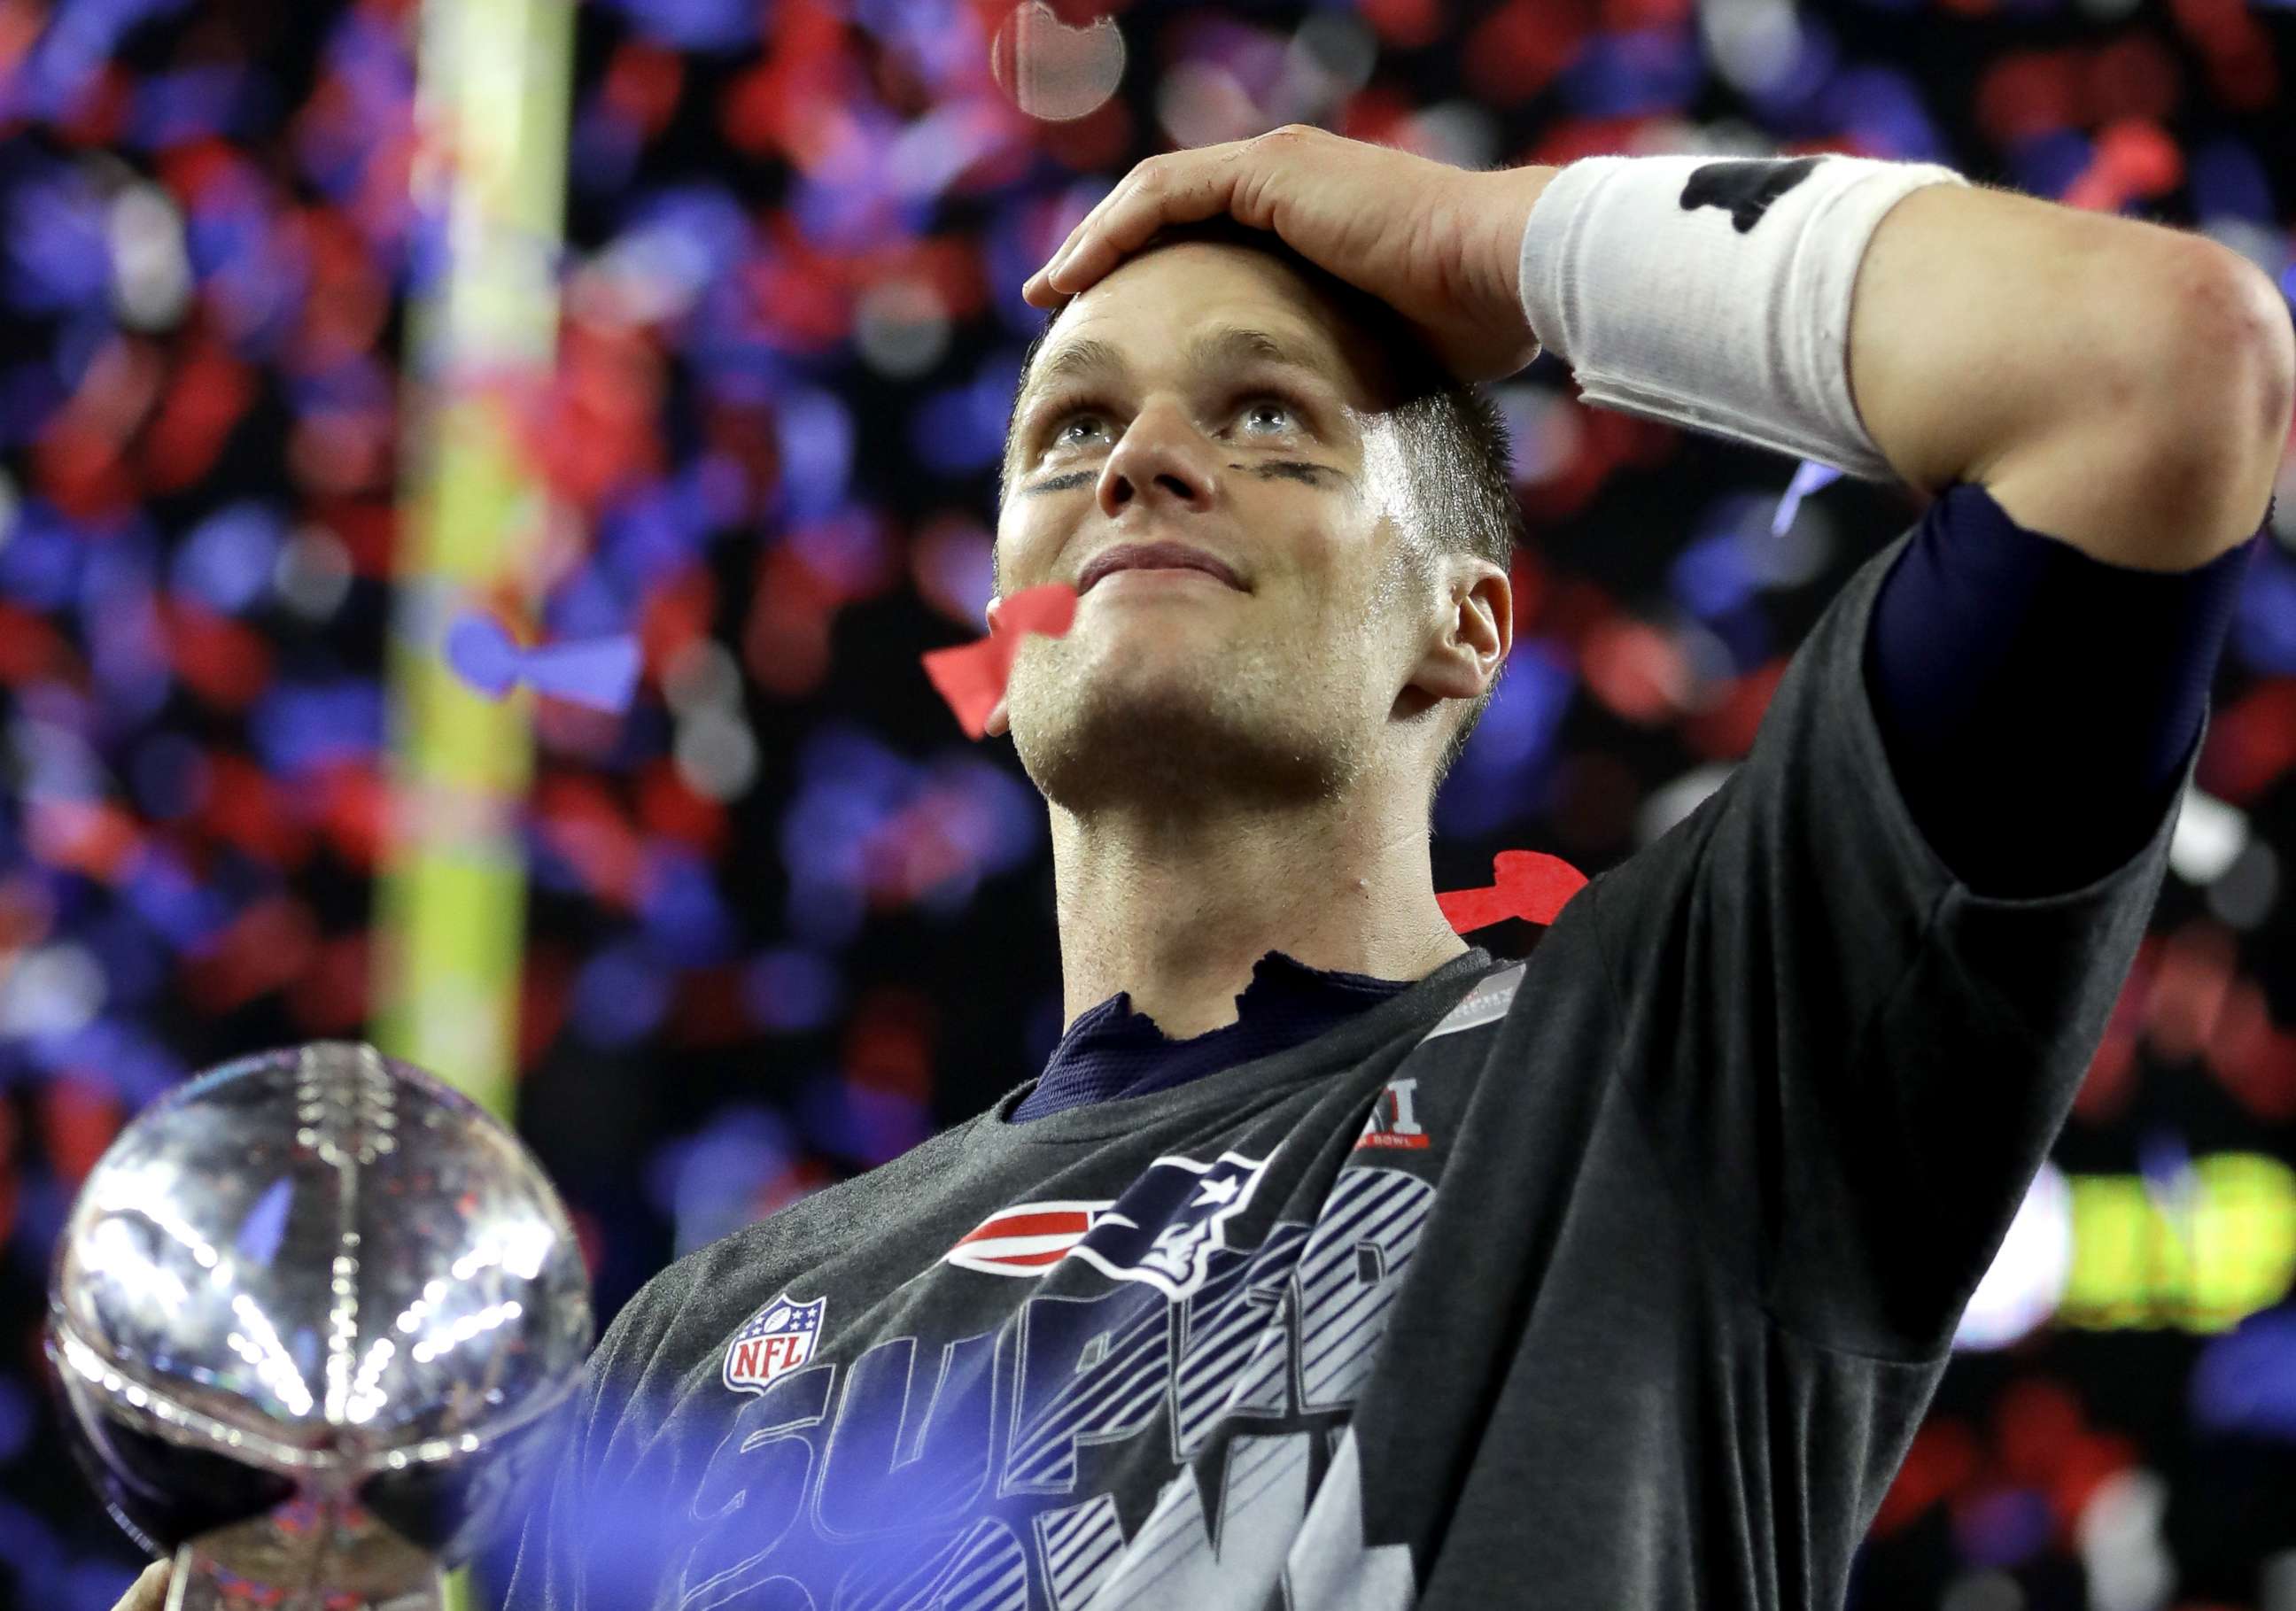 PHOTO: Tom Brady of the New England Patriots celebrates after the team defeated the Atlanta Falcons 34-28  in Super Bowl 51 at NRG Stadium on Feb. 5, 2017 in Houston, Texas.